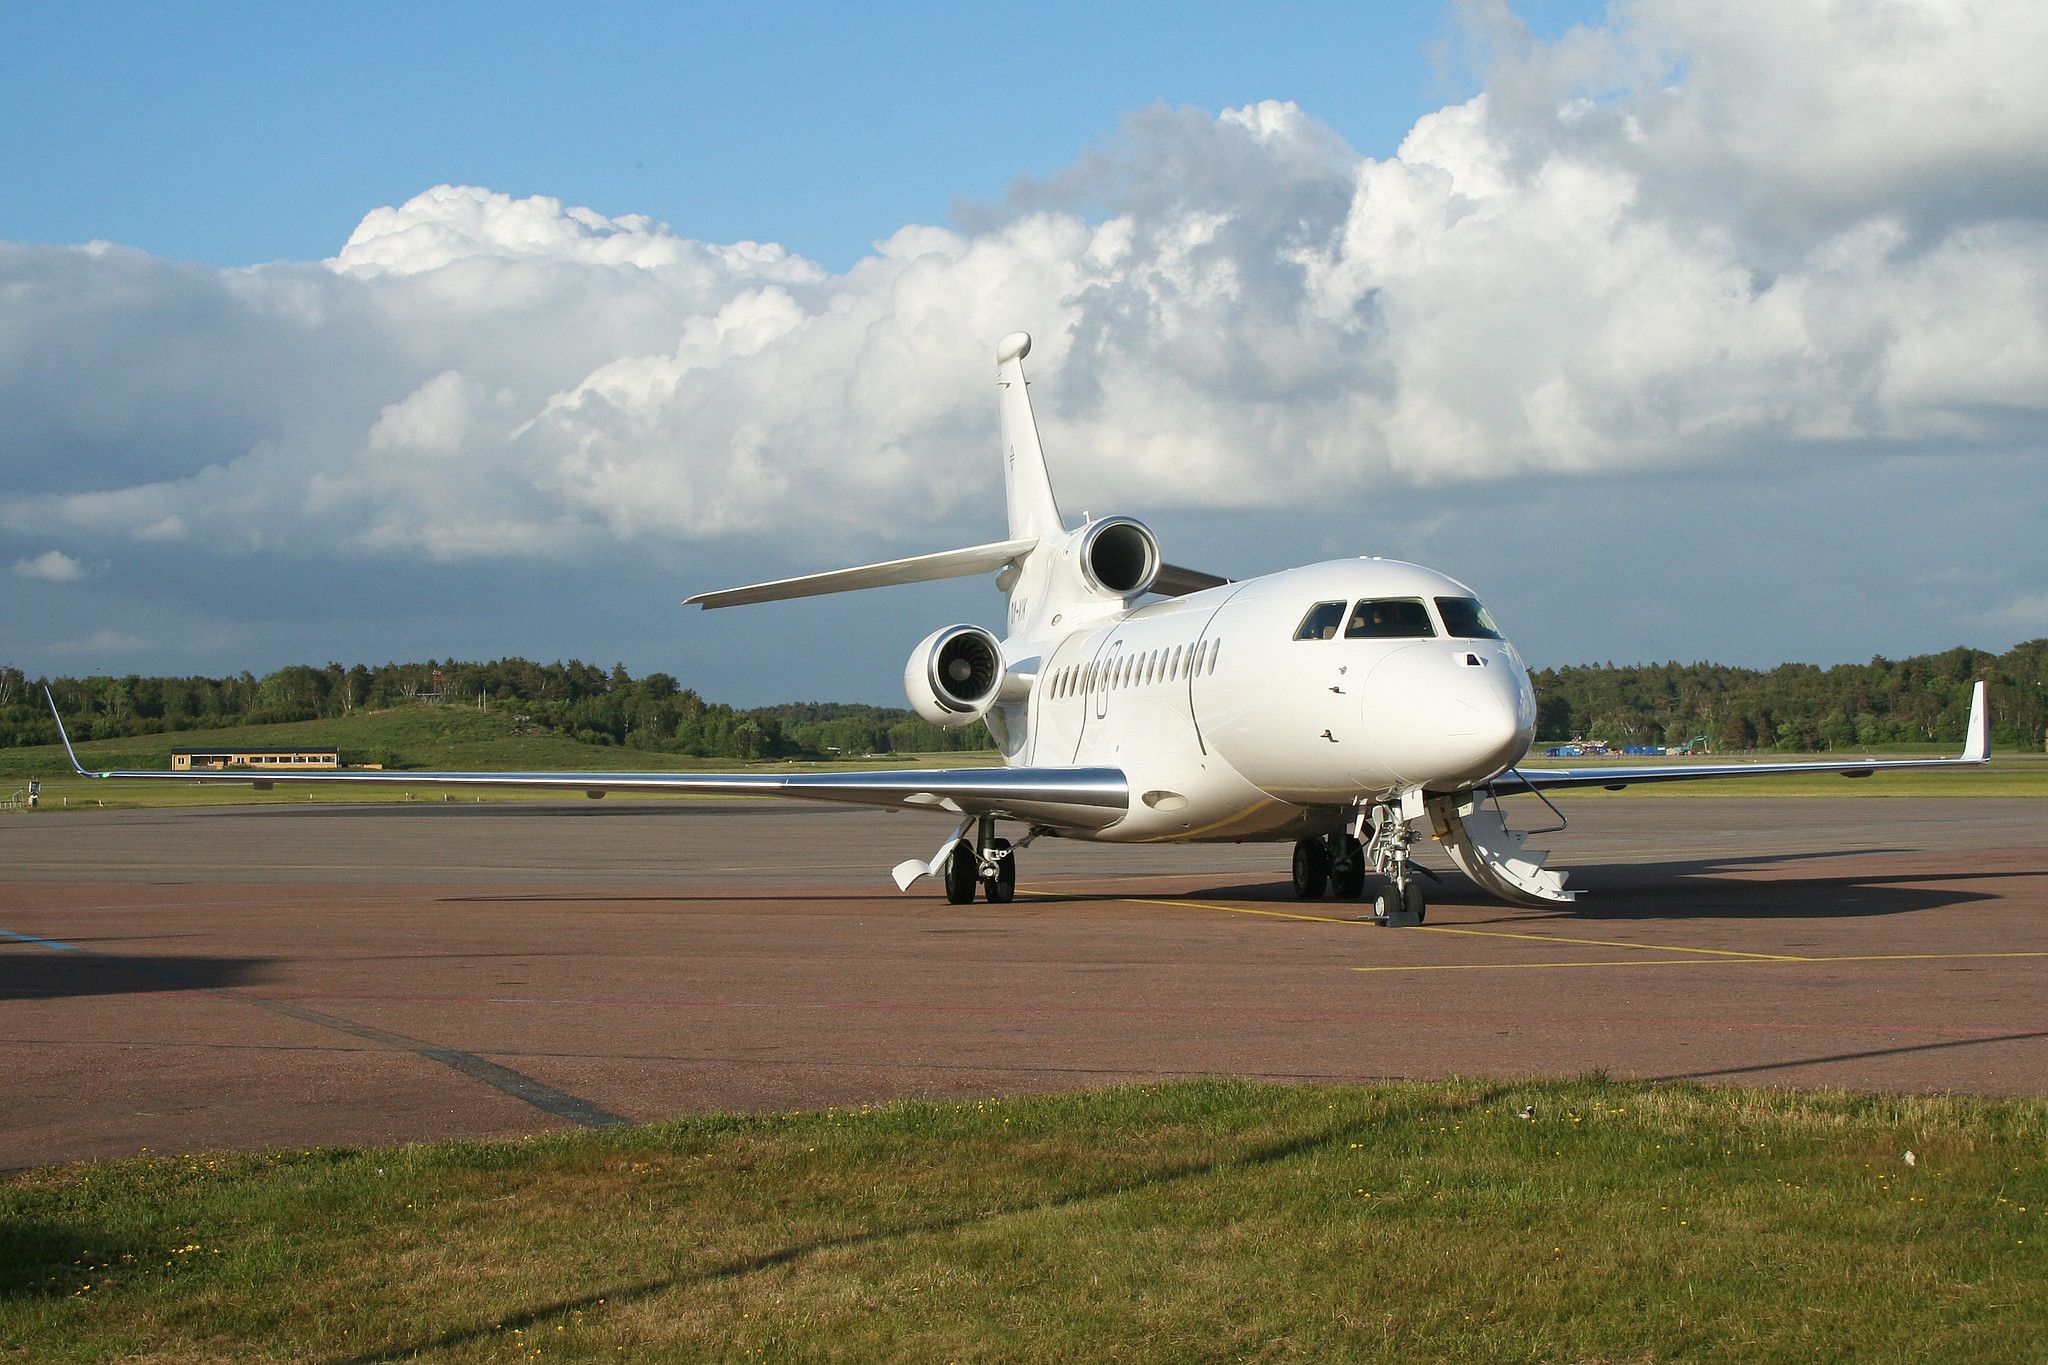 A Dassault Falcon 7X parked at an airfield.